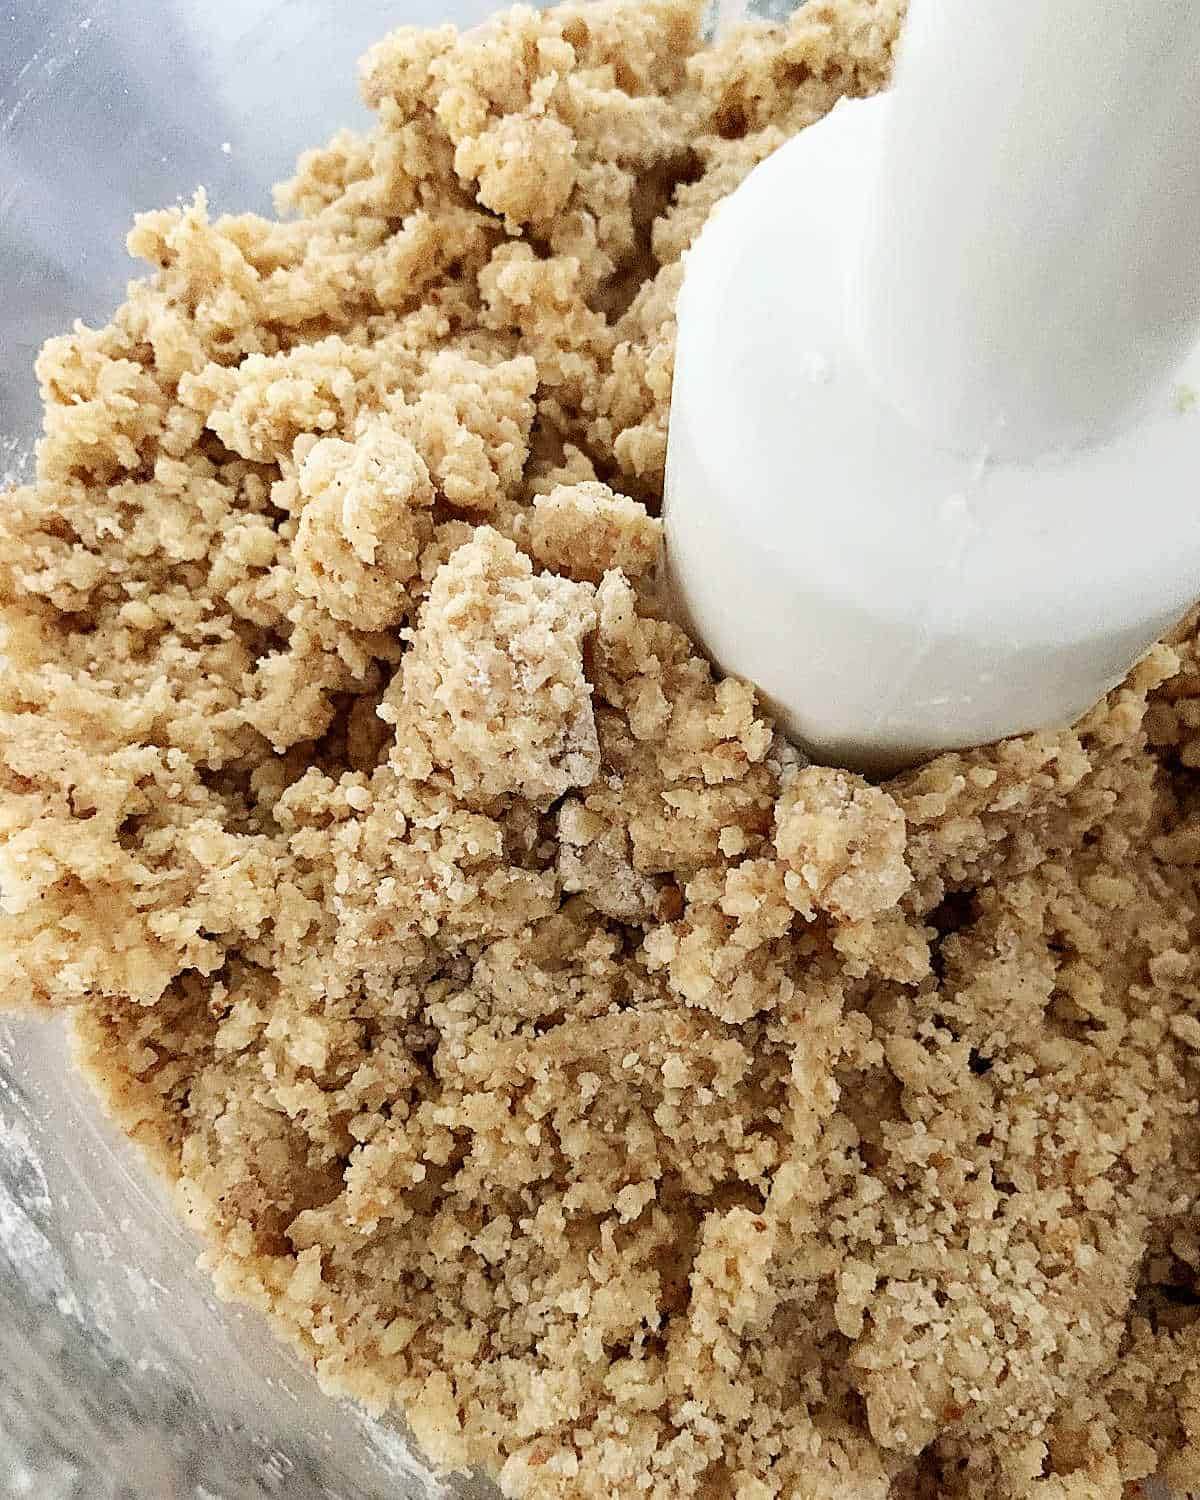 Beige crumbly dough mixture in the bowl of a food processor; close up image.